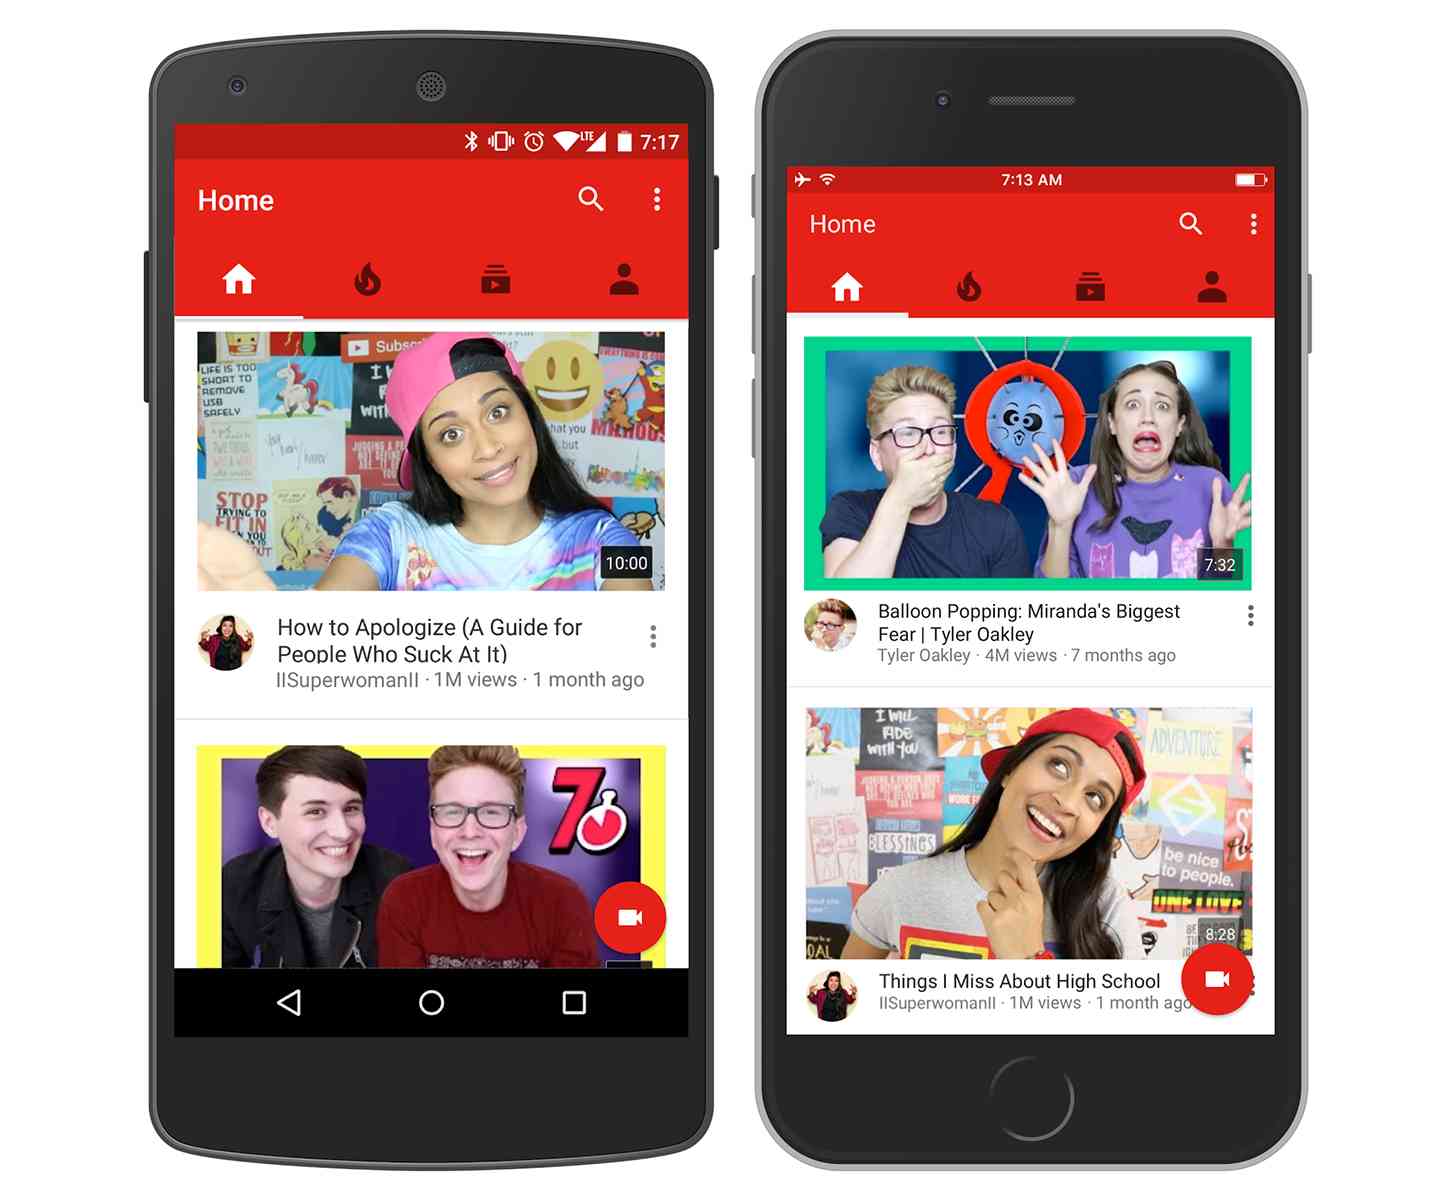 YouTube Android iPhone apps refreshed design